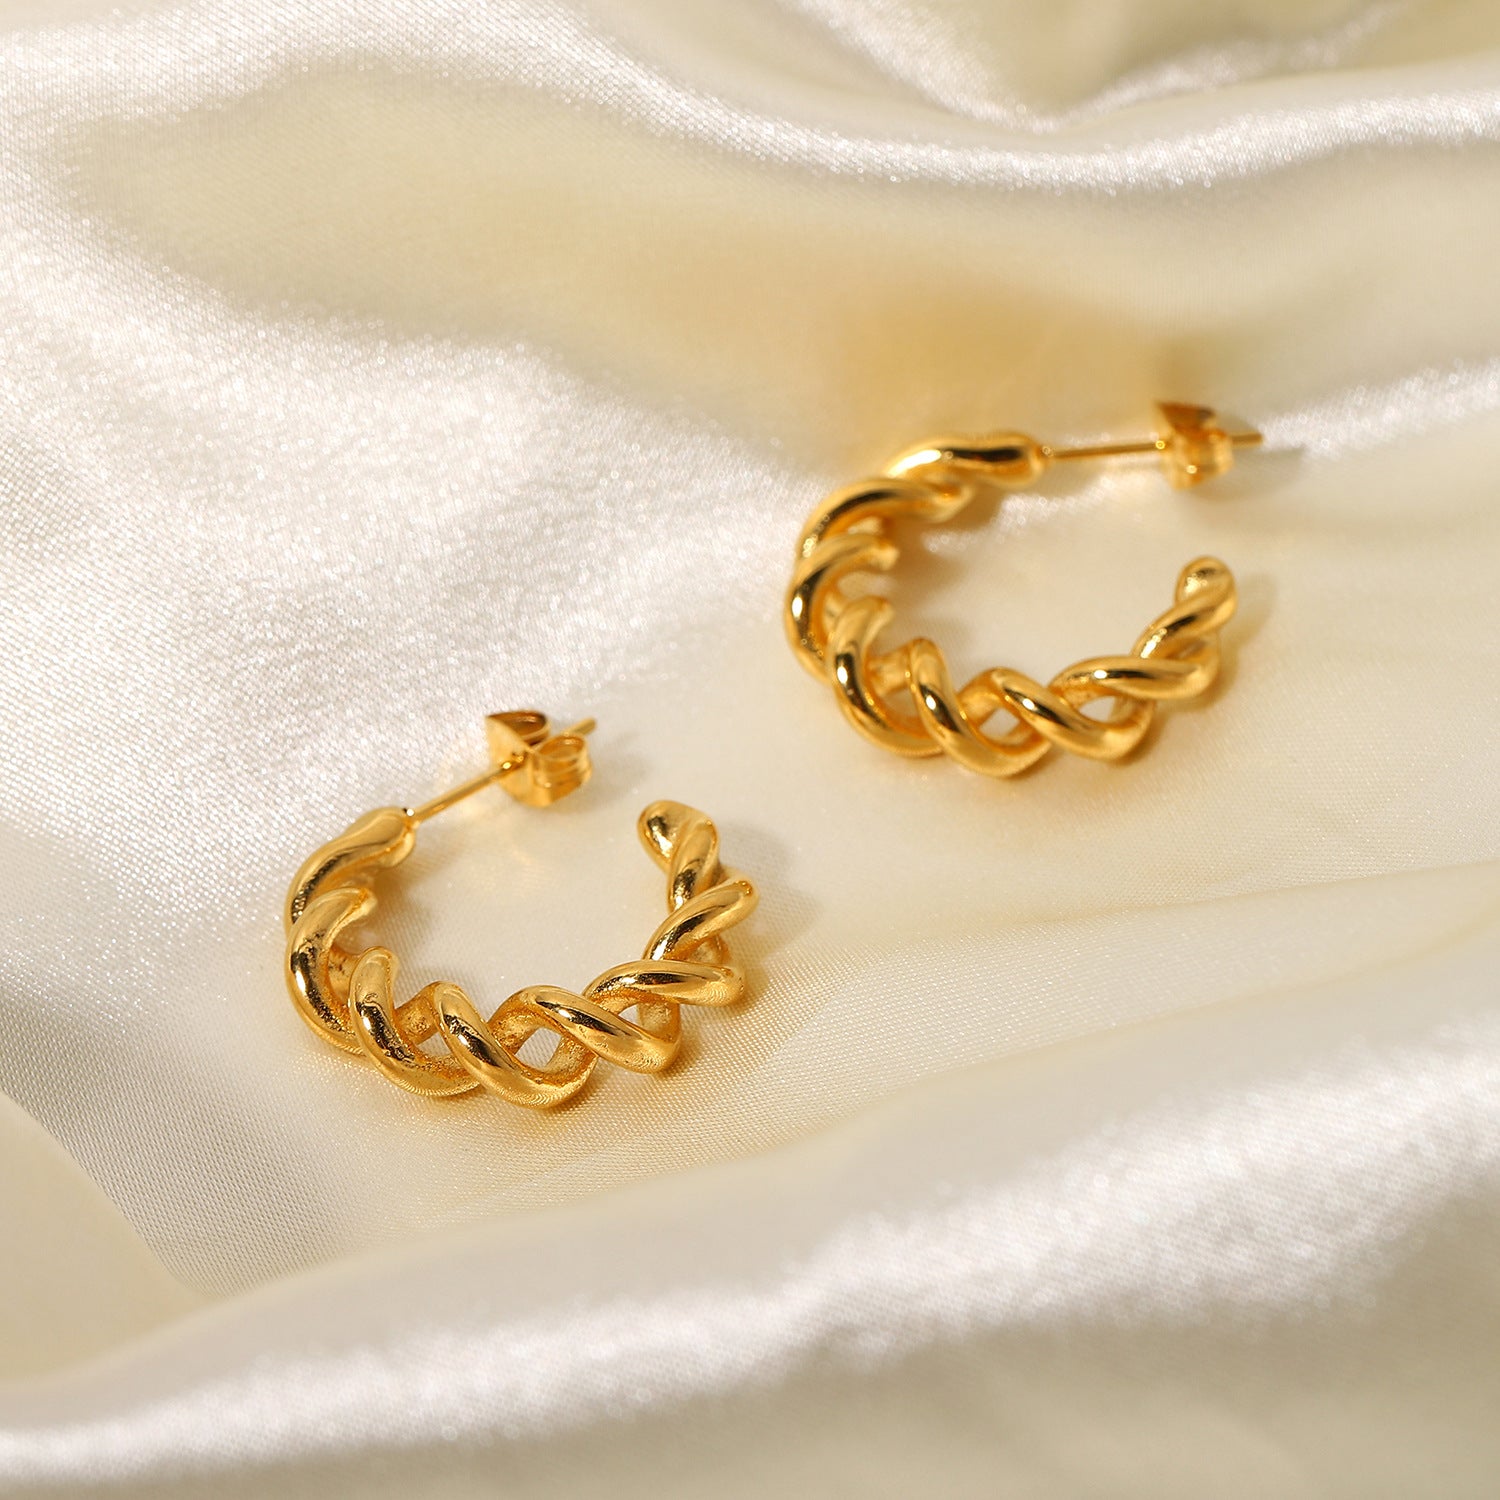 18K Gold Plated Stainless Steel Twisted Wire Hoop Earrings medyjewelry